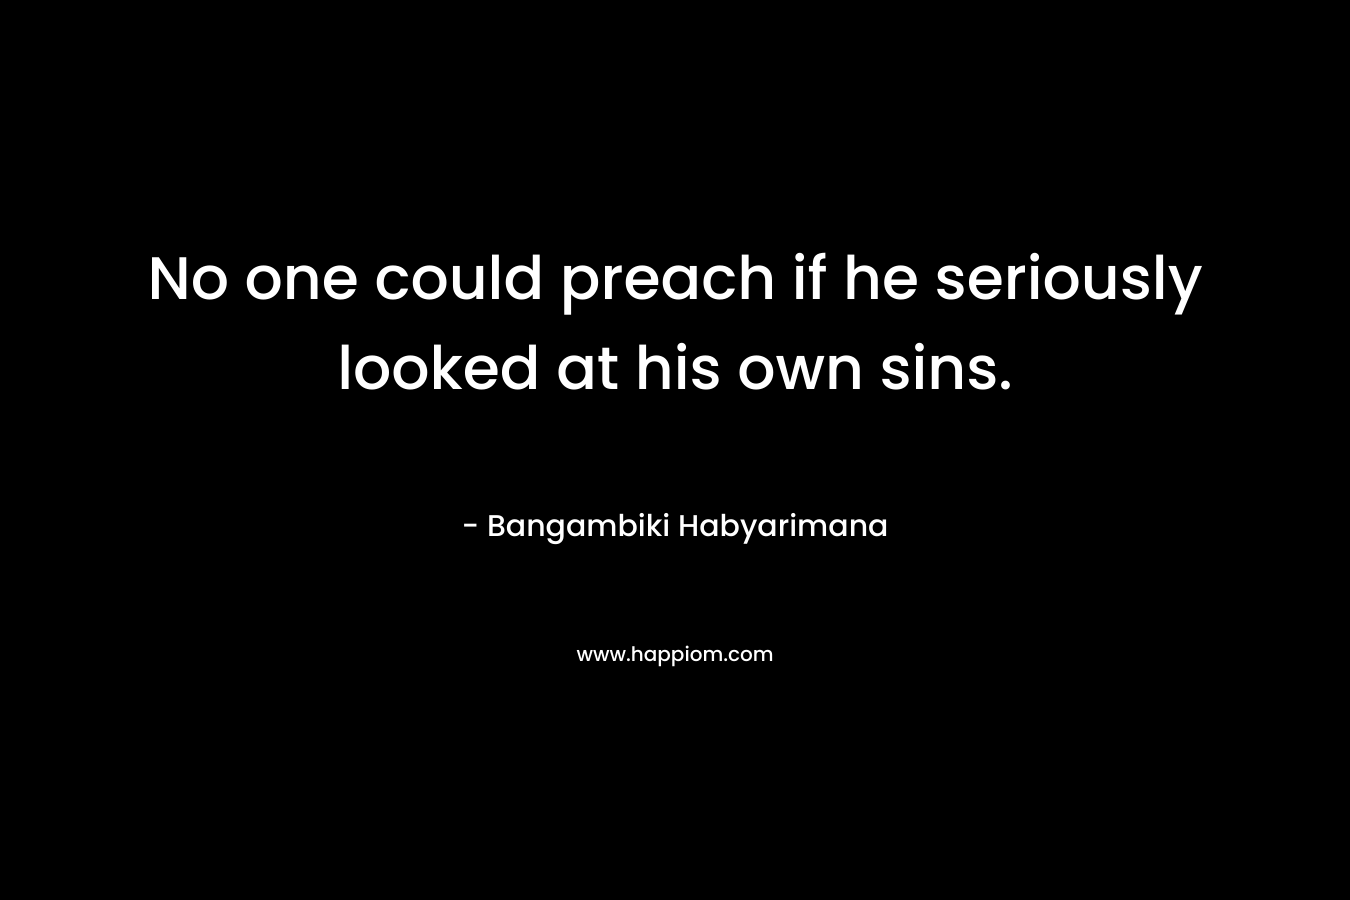 No one could preach if he seriously looked at his own sins.